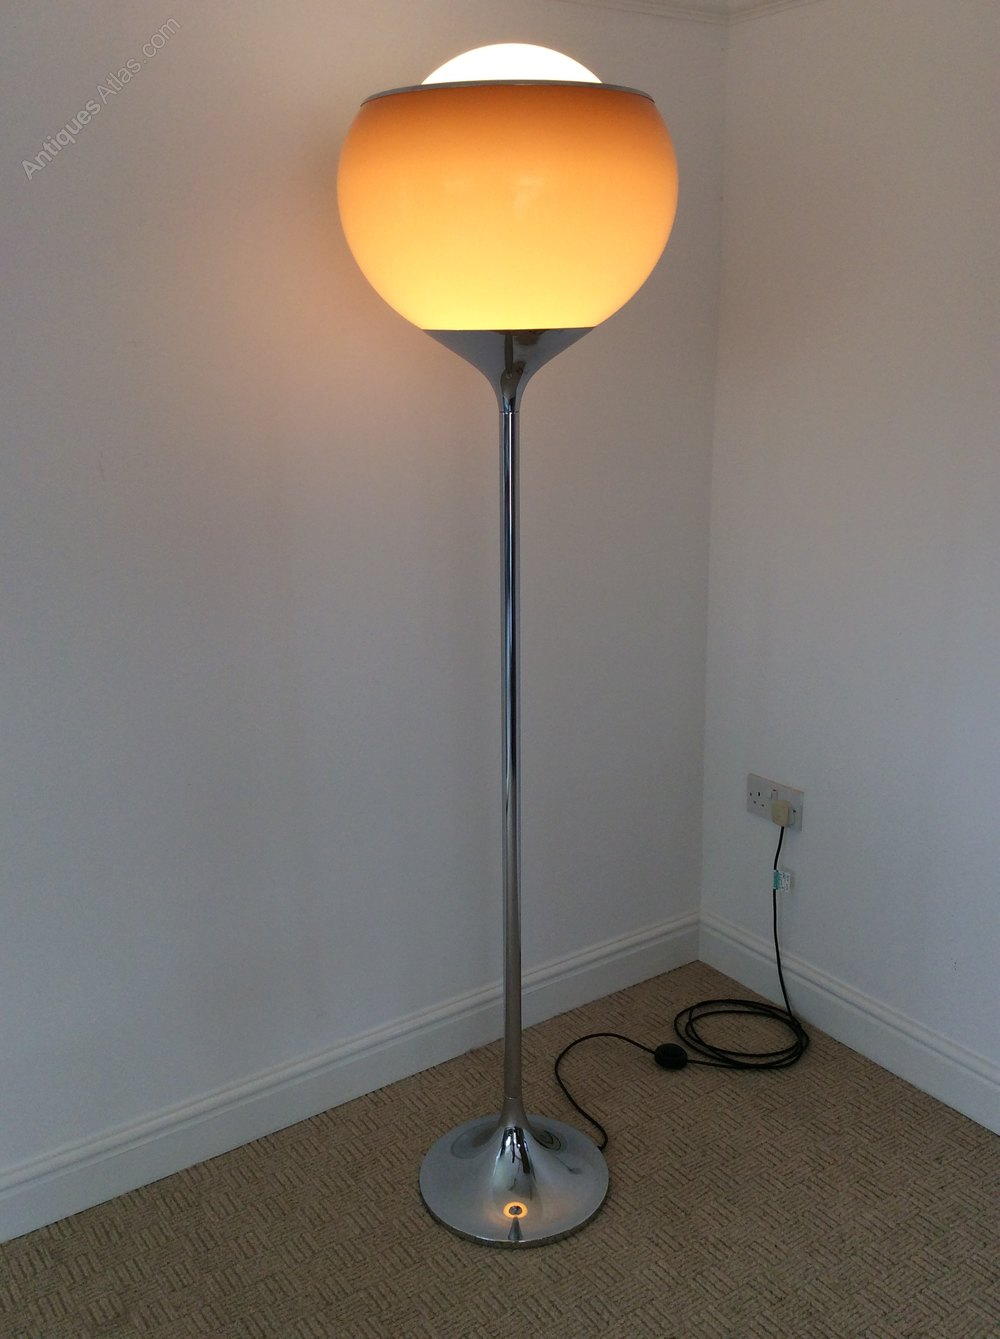 Guzzini 60s 70s Chrome And Acrylic Floor Lamp throughout sizing 1000 X 1339